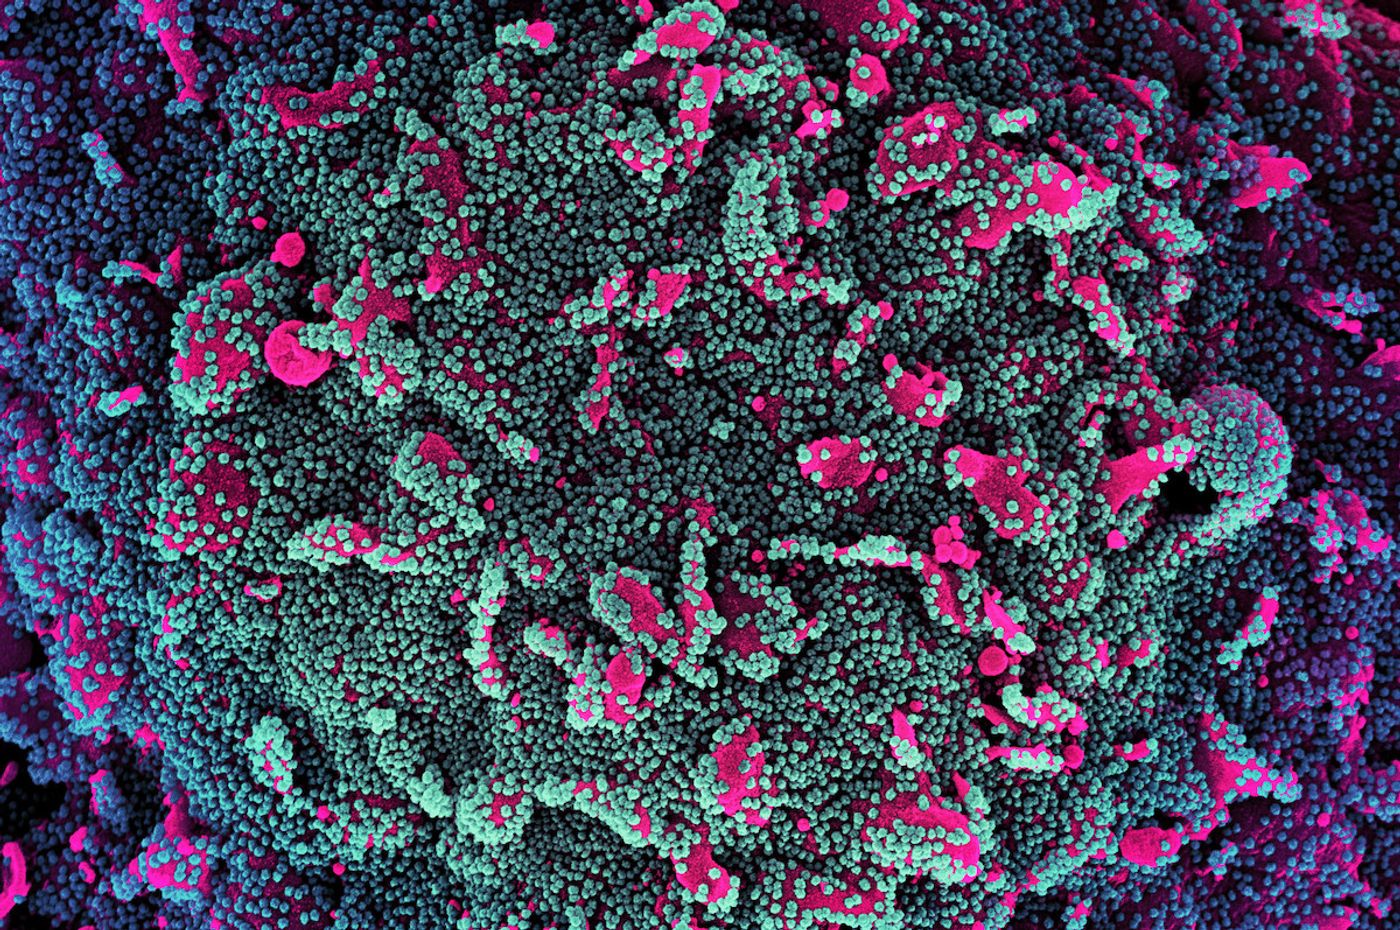 (Cropped from a) Colorized scanning electron micrograph of a cell (pink) heavily infected with SARS-CoV-2 virus particles (teal and purple), isolated from a patient sample. Image captured at the NIAID Integrated Research Facility (IRF) in Fort Detrick, Maryland. / Credit: NIAID 